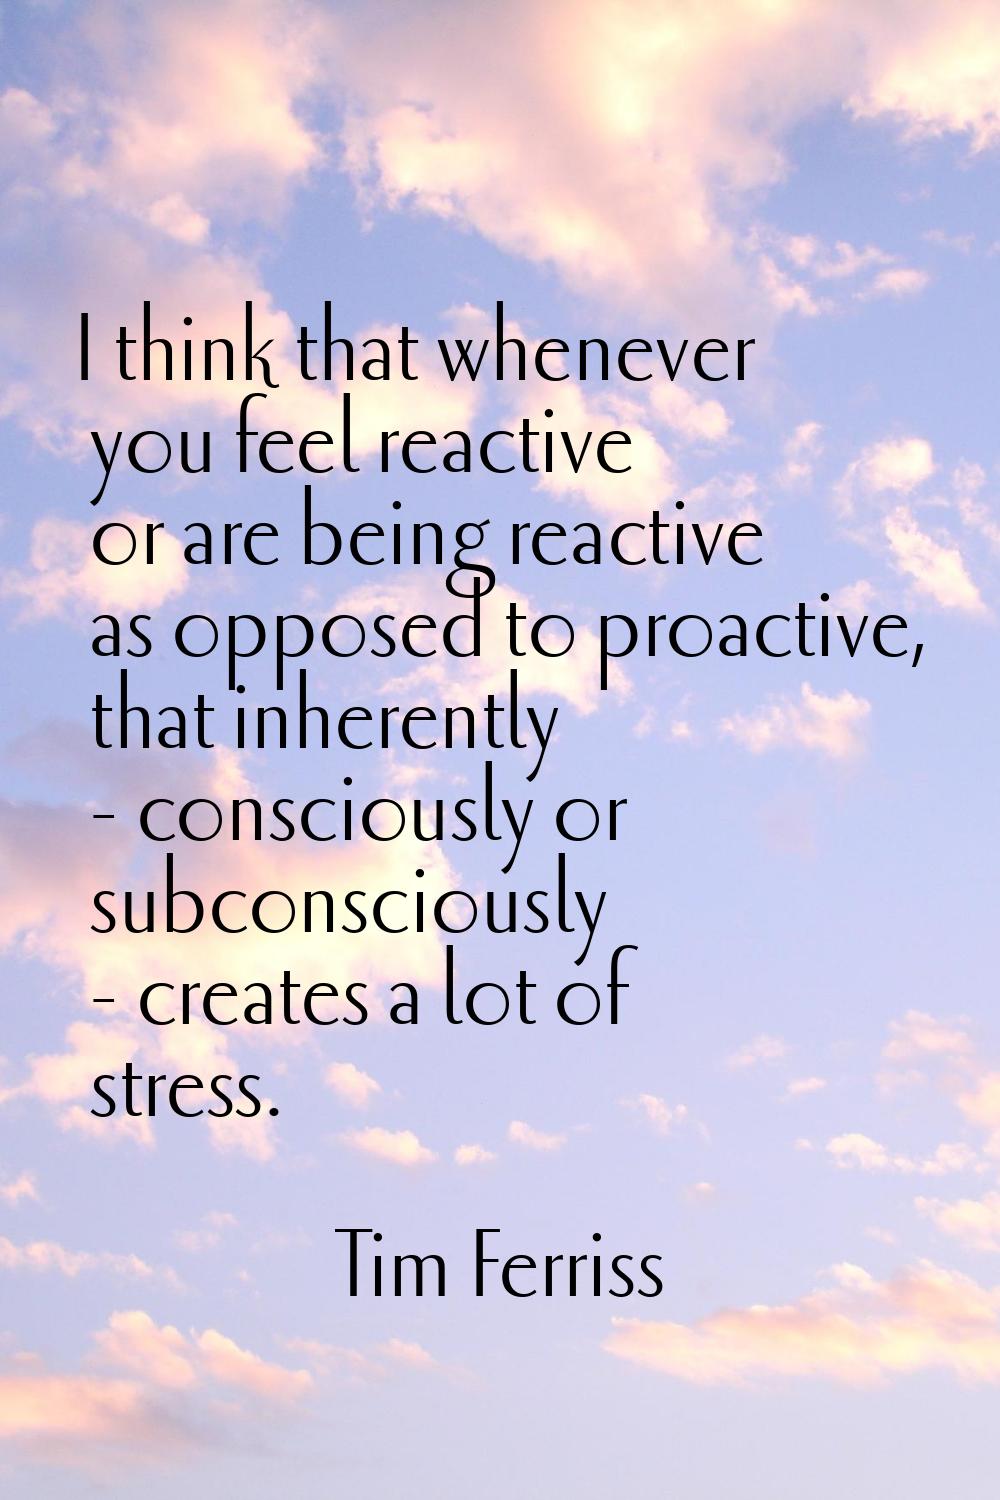 I think that whenever you feel reactive or are being reactive as opposed to proactive, that inheren